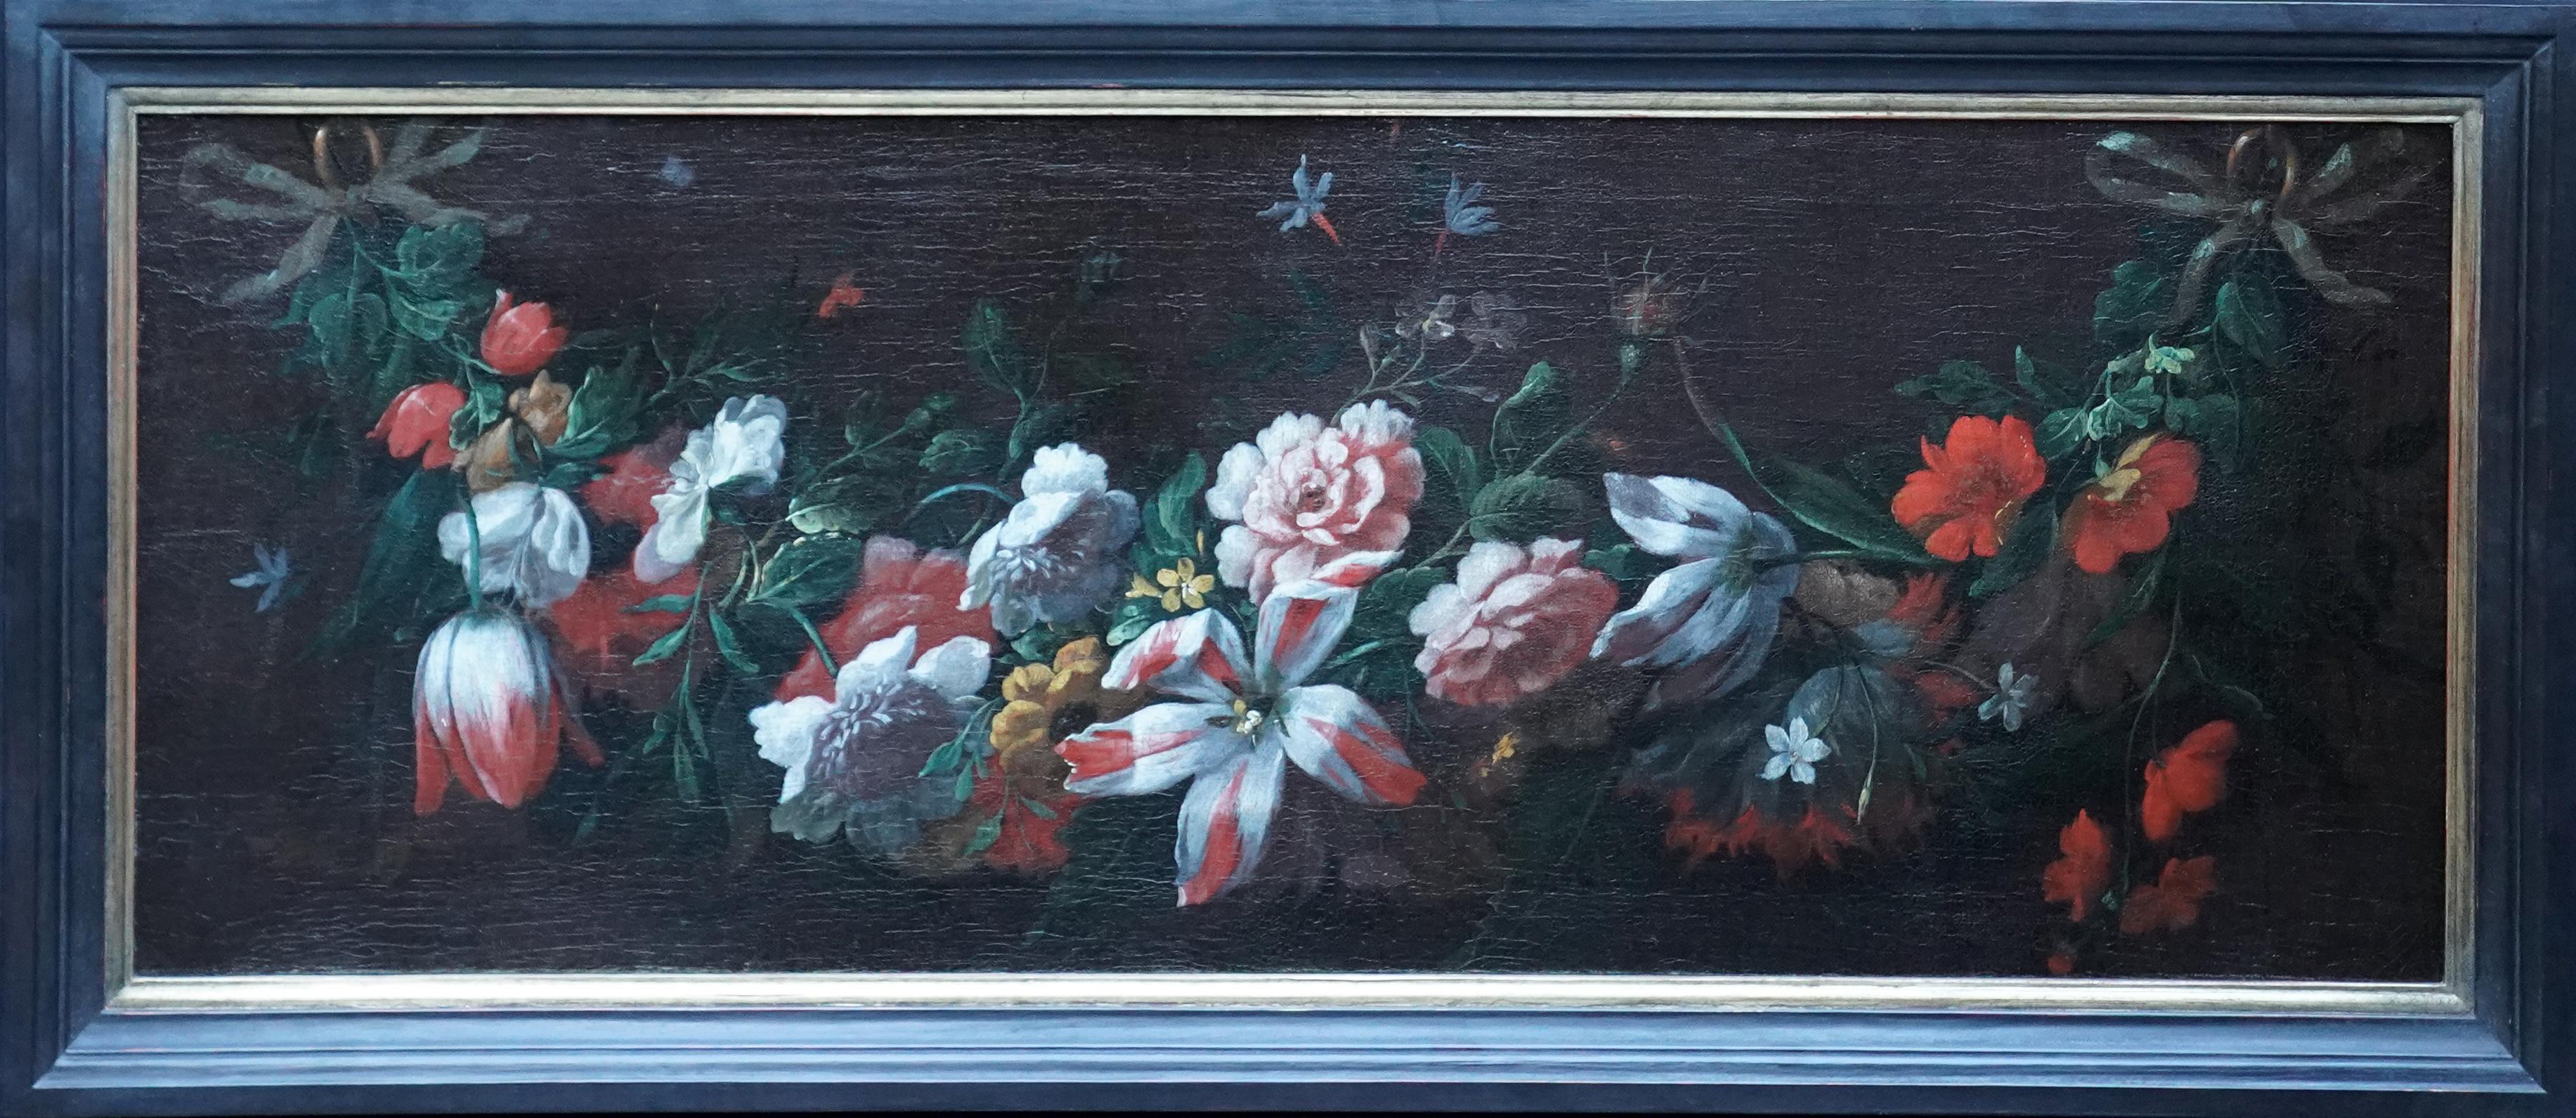 Still Life Garland of Flowers - Flemish 18thC art Old Master floral oil painting